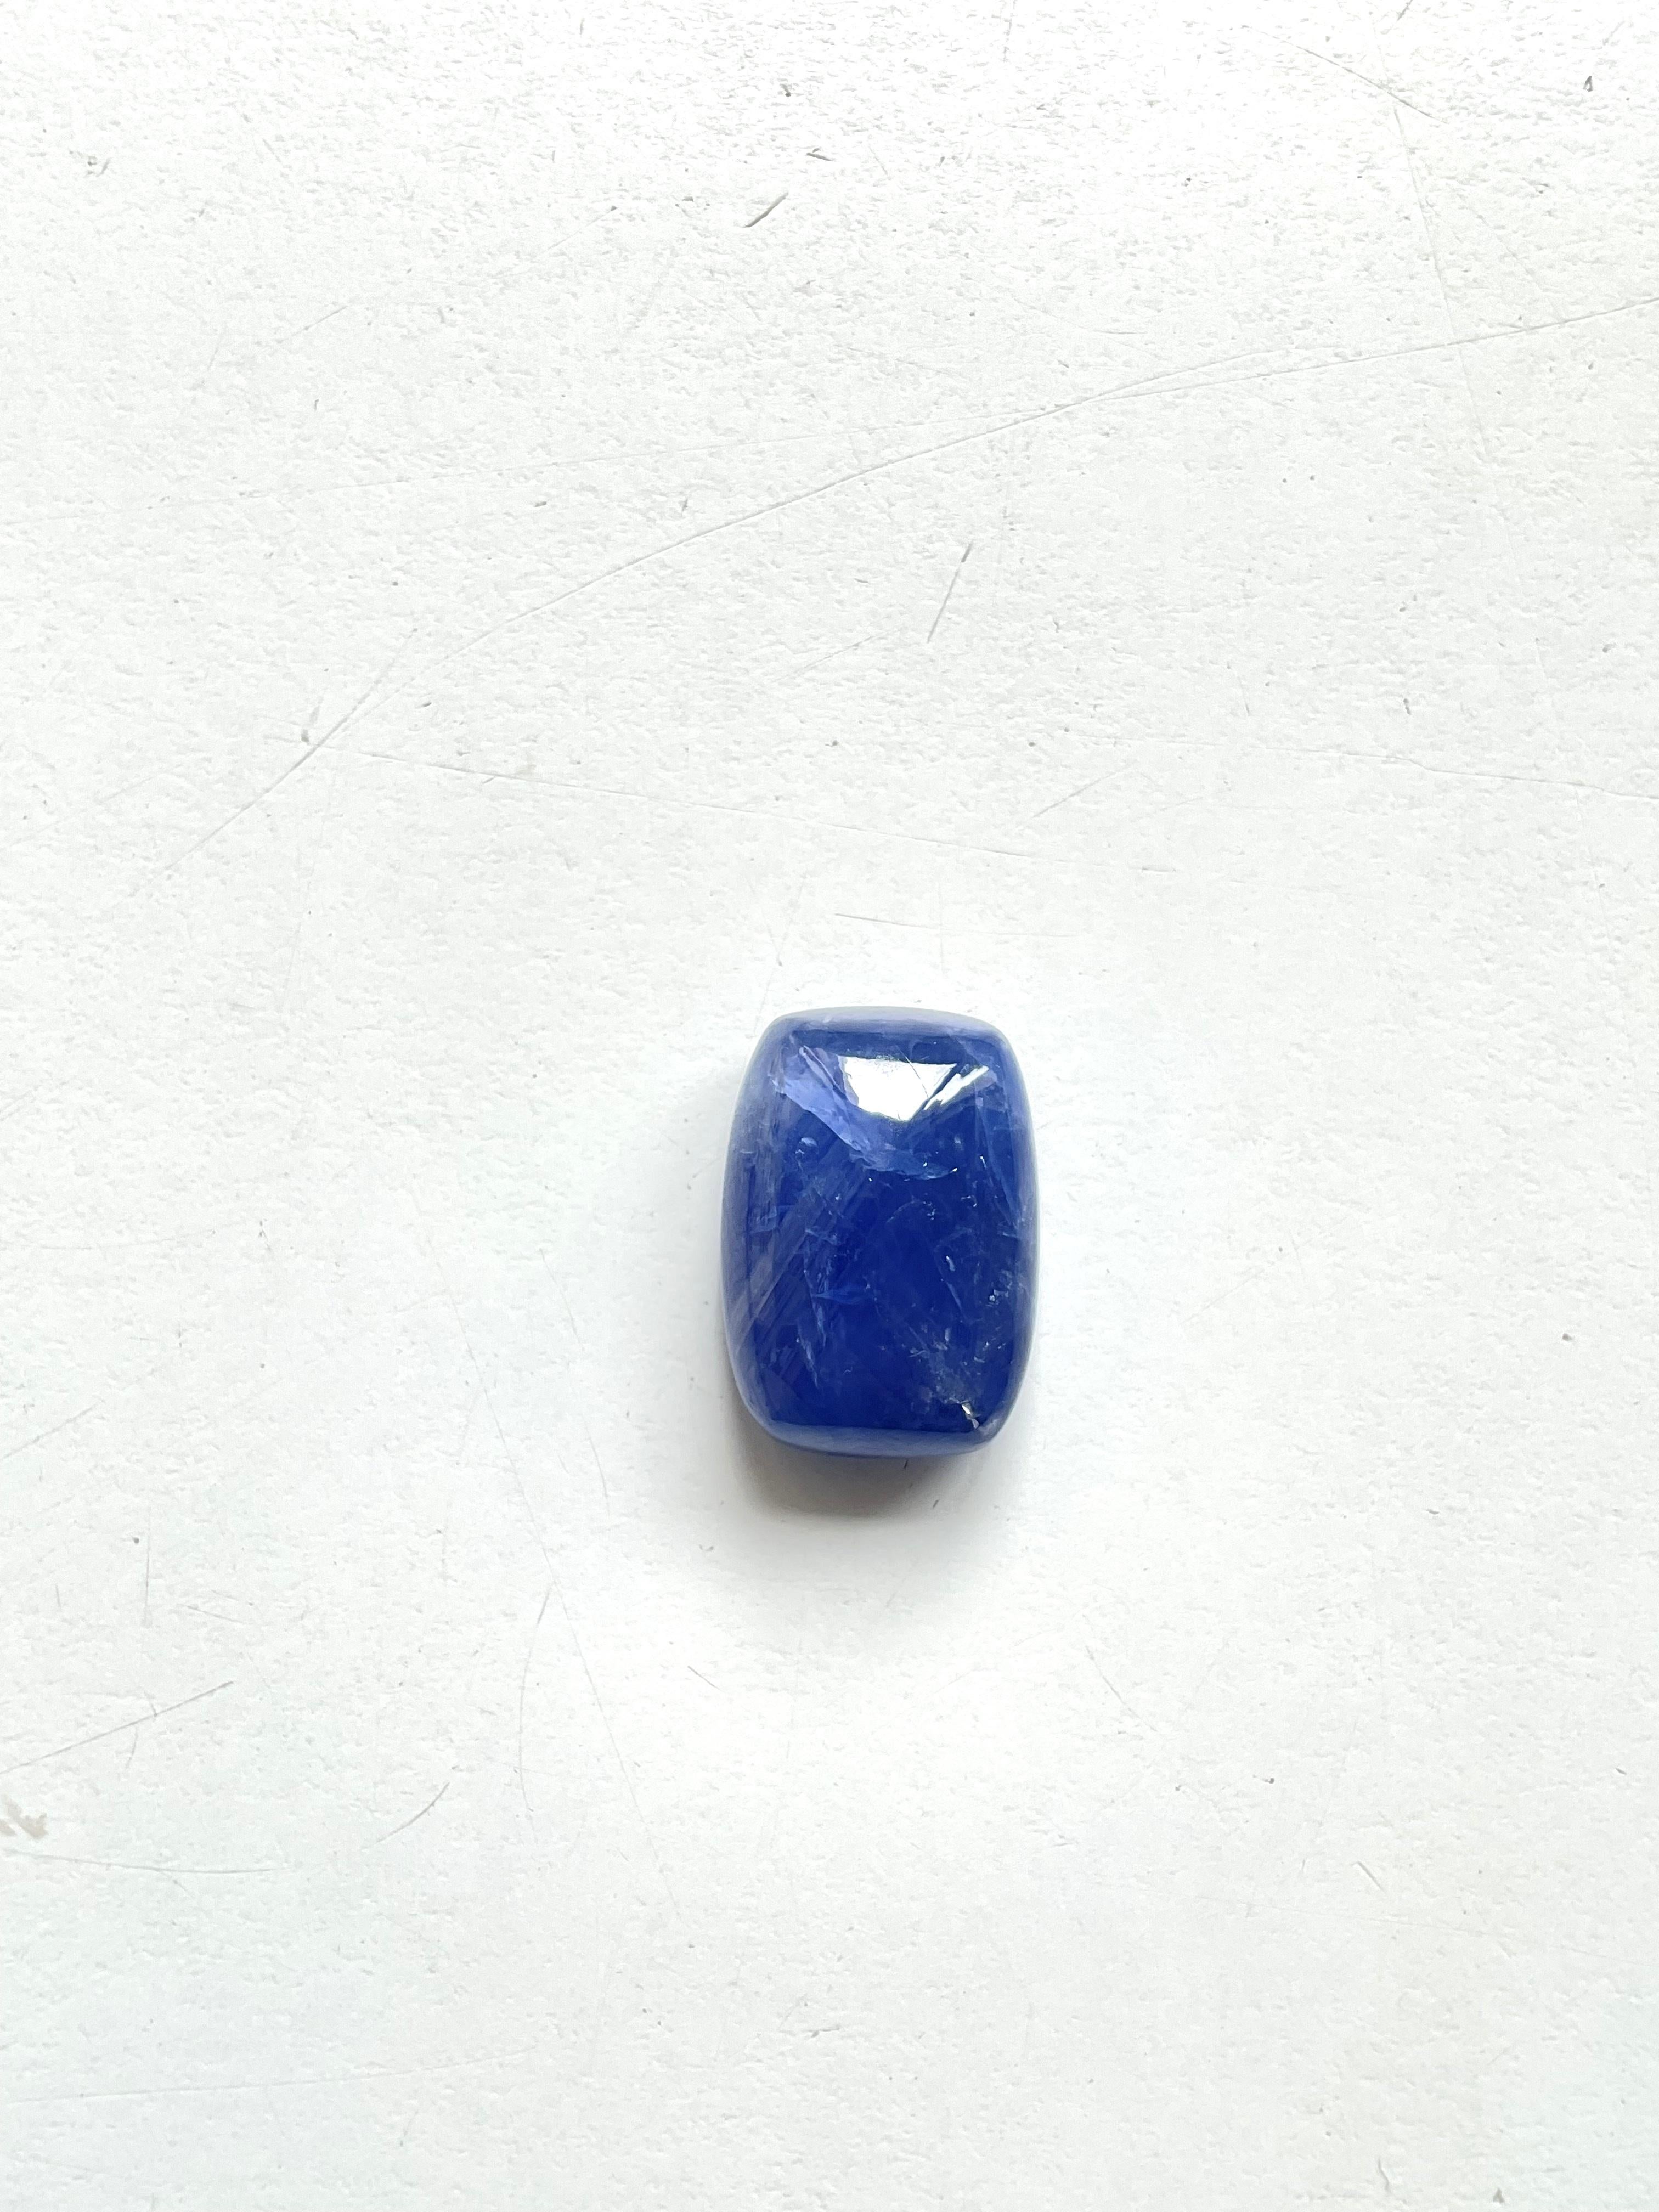 41.73 Carats Burmese Sapphire Cabochon Sugarloaf No-Heat Top Quality Natural Gem For Sale 1